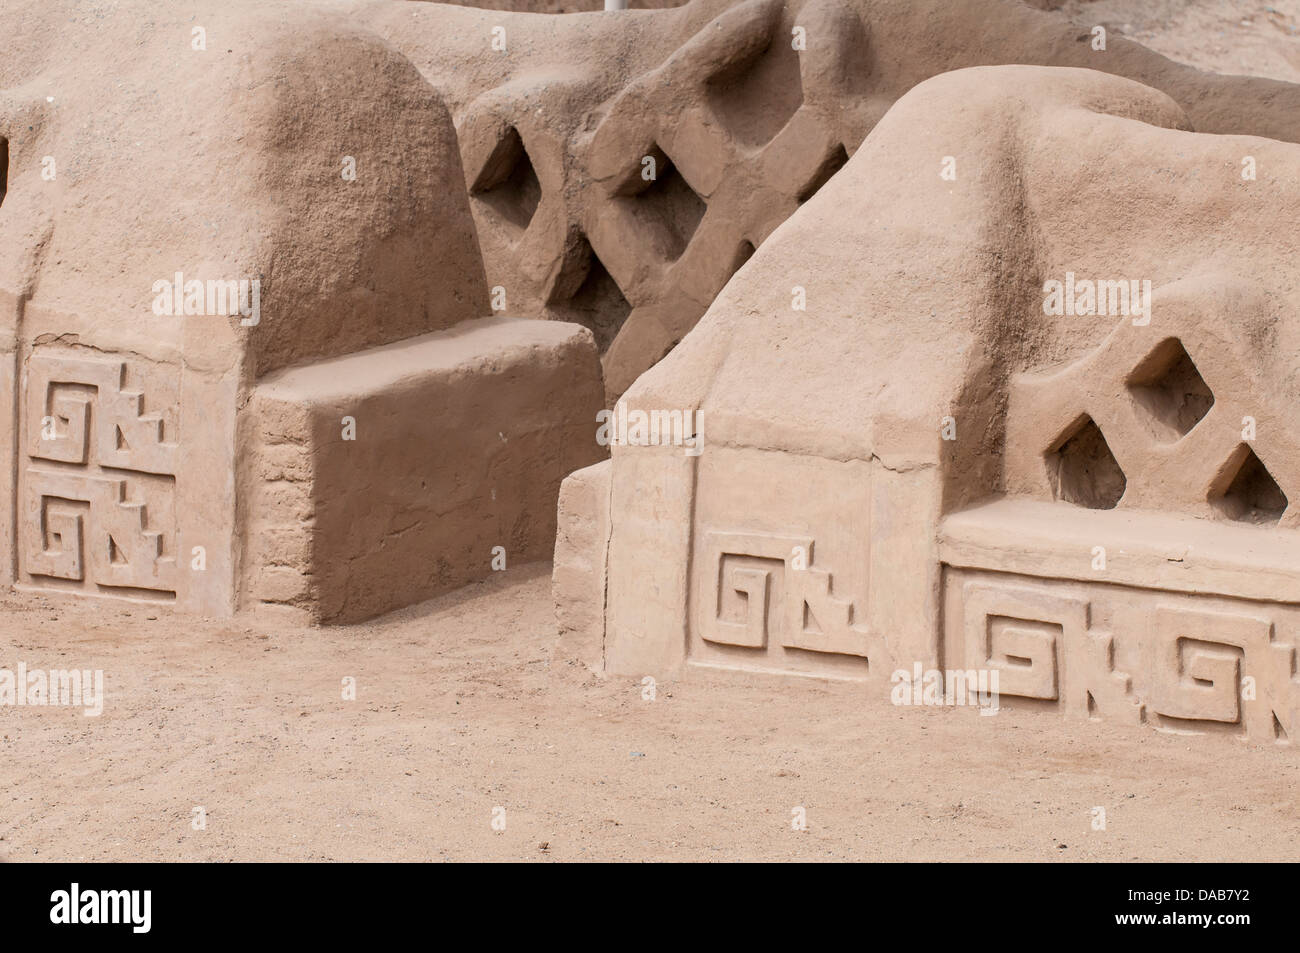 Petrogylph relief at ancient ruins of Chan Chan Pre-Columbian archaeological unesco world heritage site near Trujillo, Peru. Stock Photo